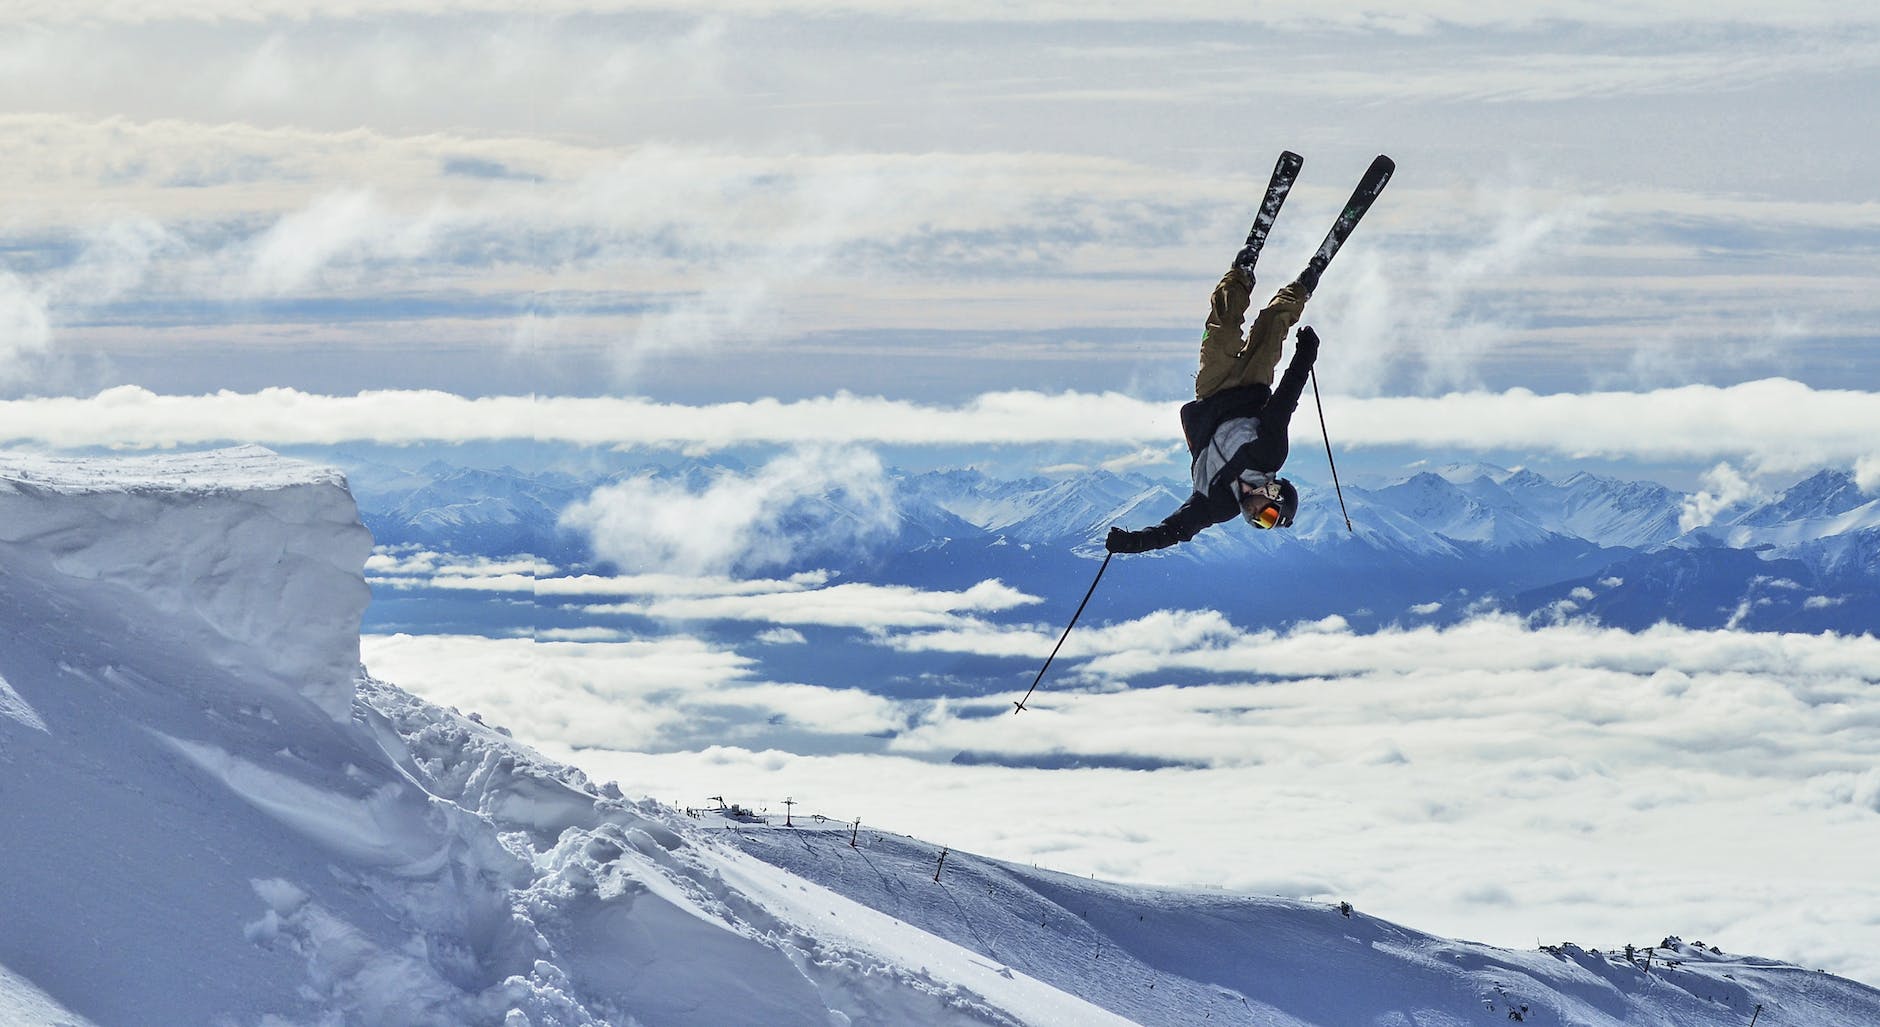 unrecognizable skier performing upside down trick in snowy mountains